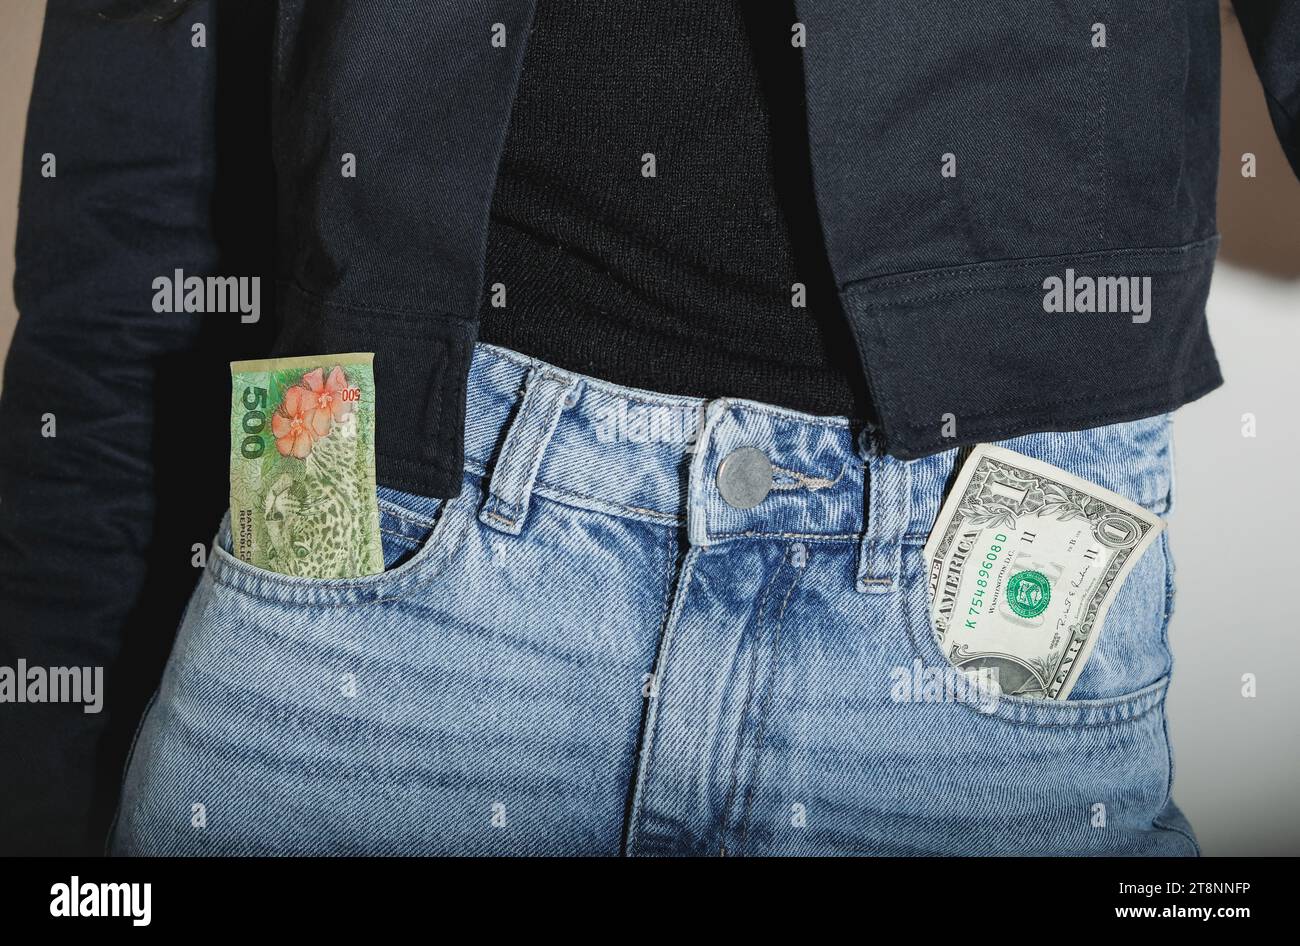 Argentine Pesos And One Dollar Bill. Inflation concept and devaluation of the Argentine currency. Stock Photo